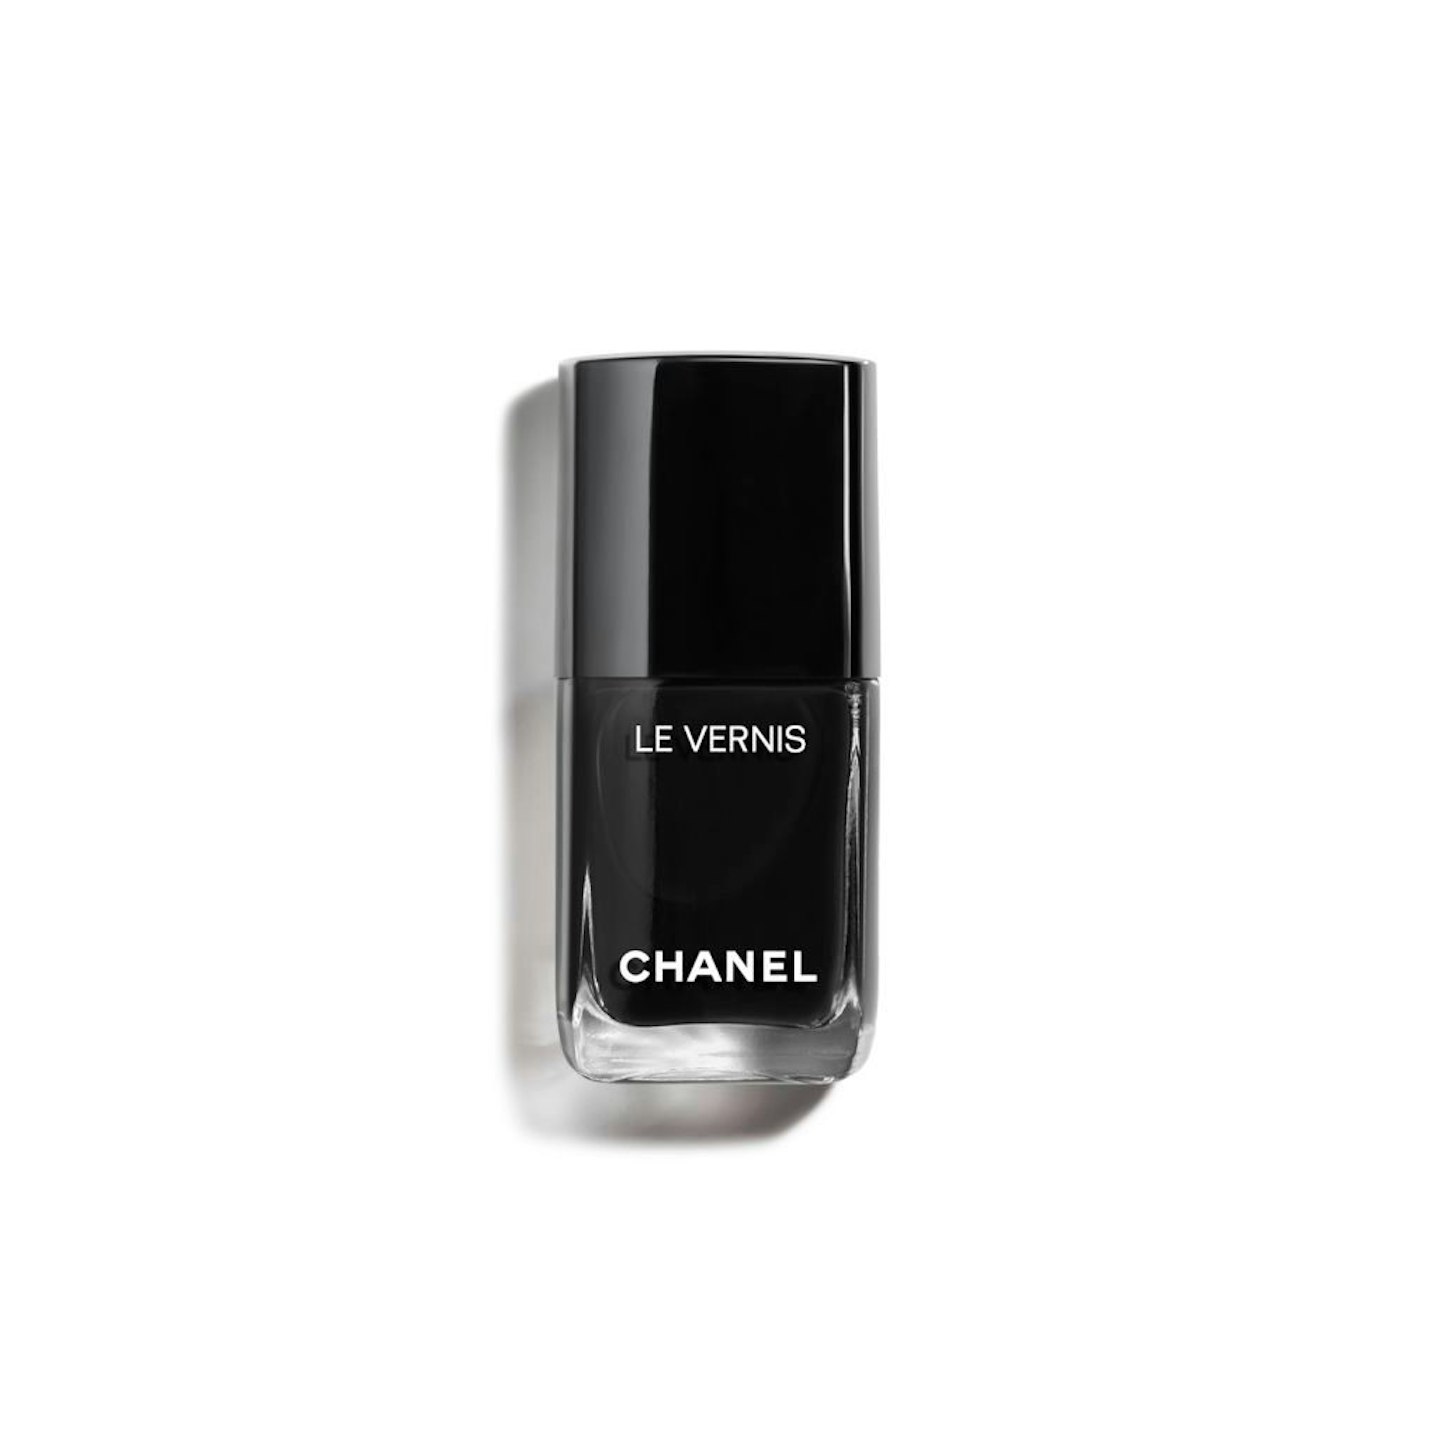 Le Vernis Limited Edition Longwear Nail Colour in Pure Black, £22